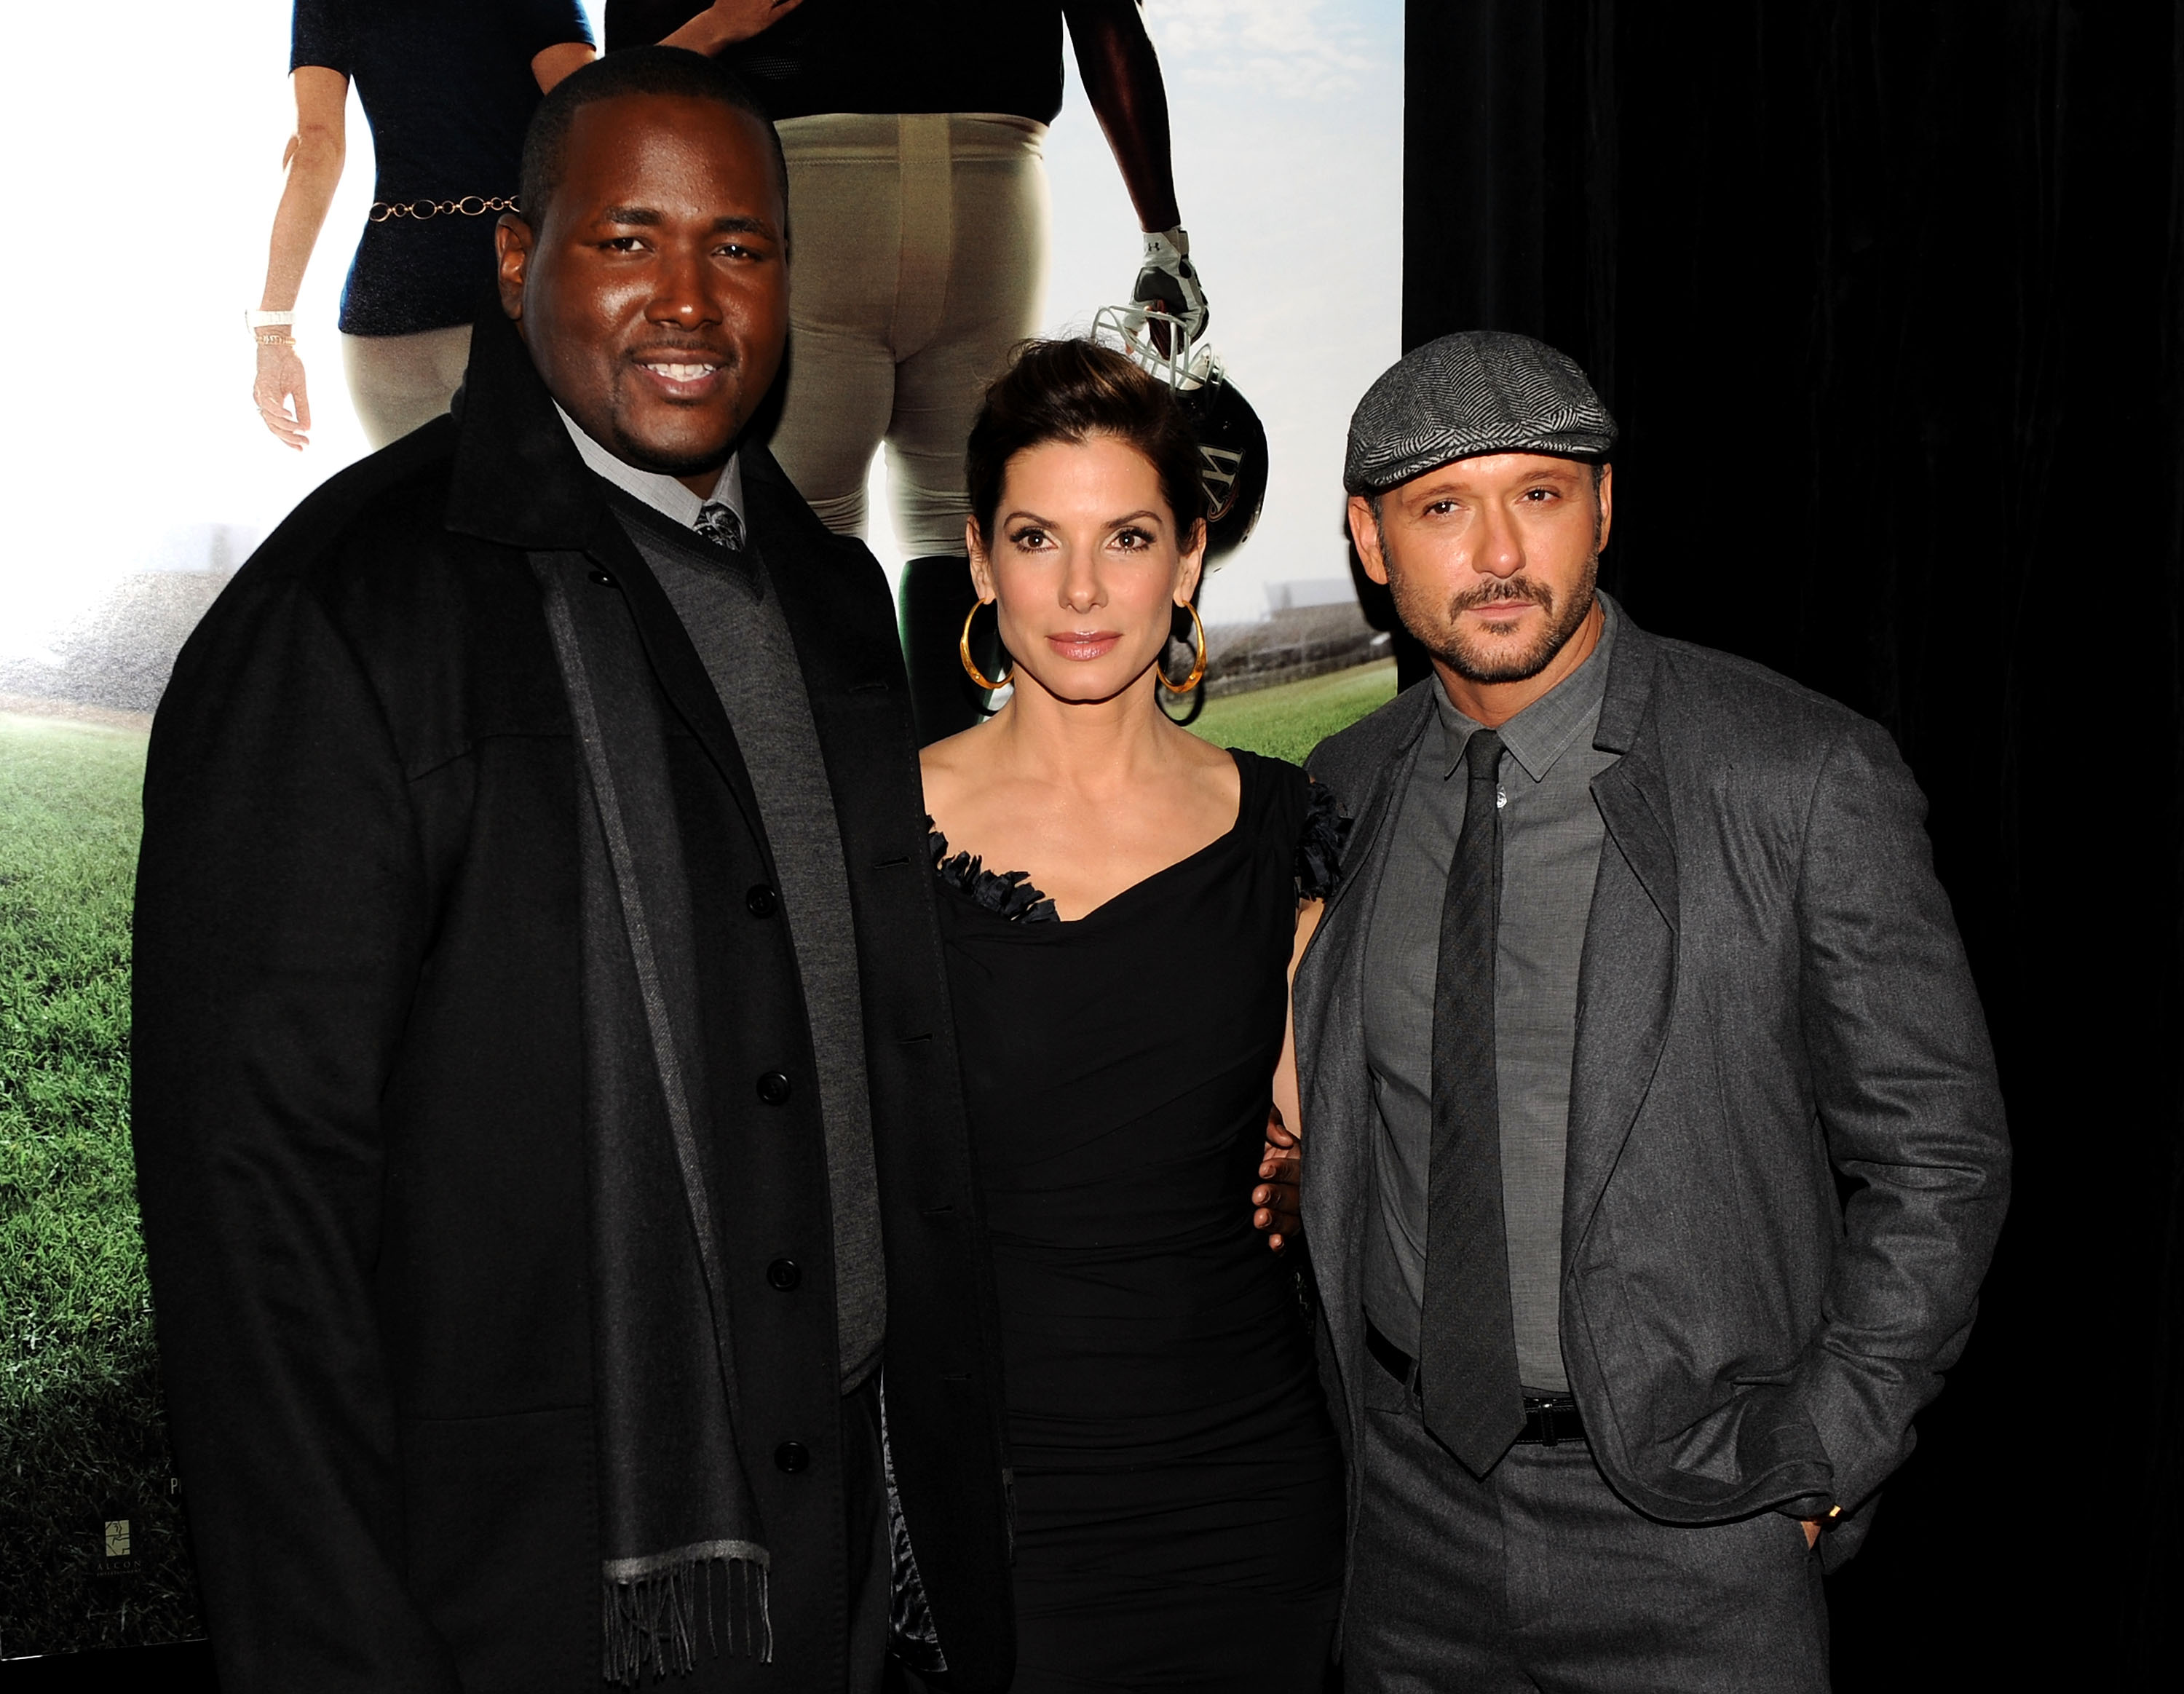 Quinton Aaron, Sandra Bullock, and Tim McGraw in New York City on November 17, 2009 | Source: Getty Images